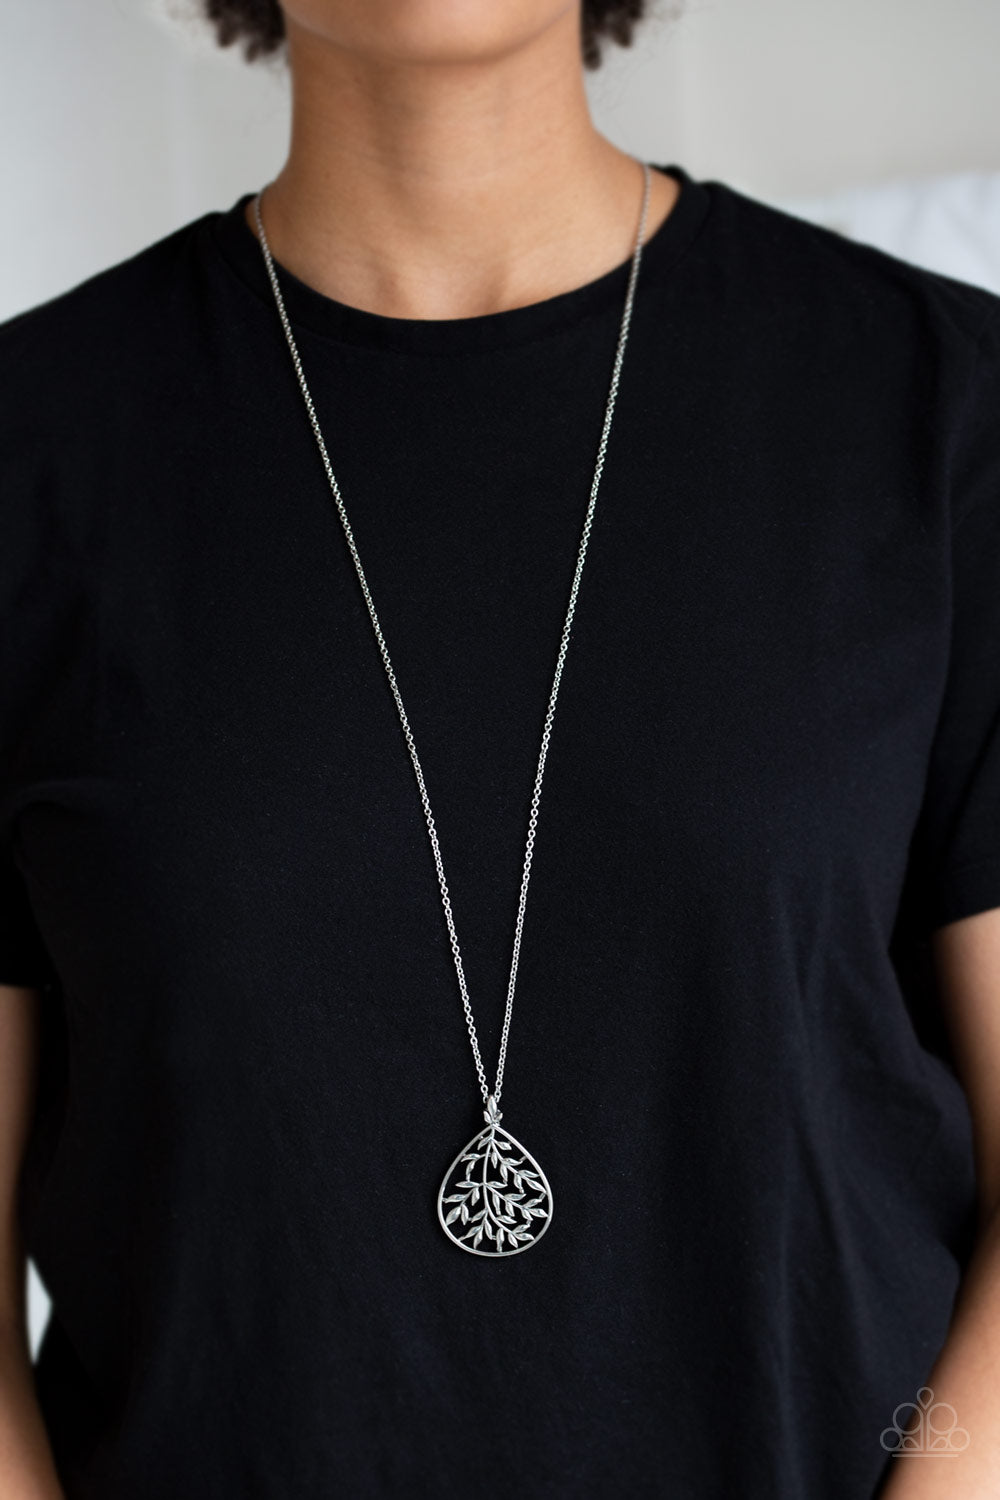 Paparazzi BOUGH Down - Silver Leafy Branches Teardrop - Necklace and matching Earrings - $5 Jewelry with Ashley Swint